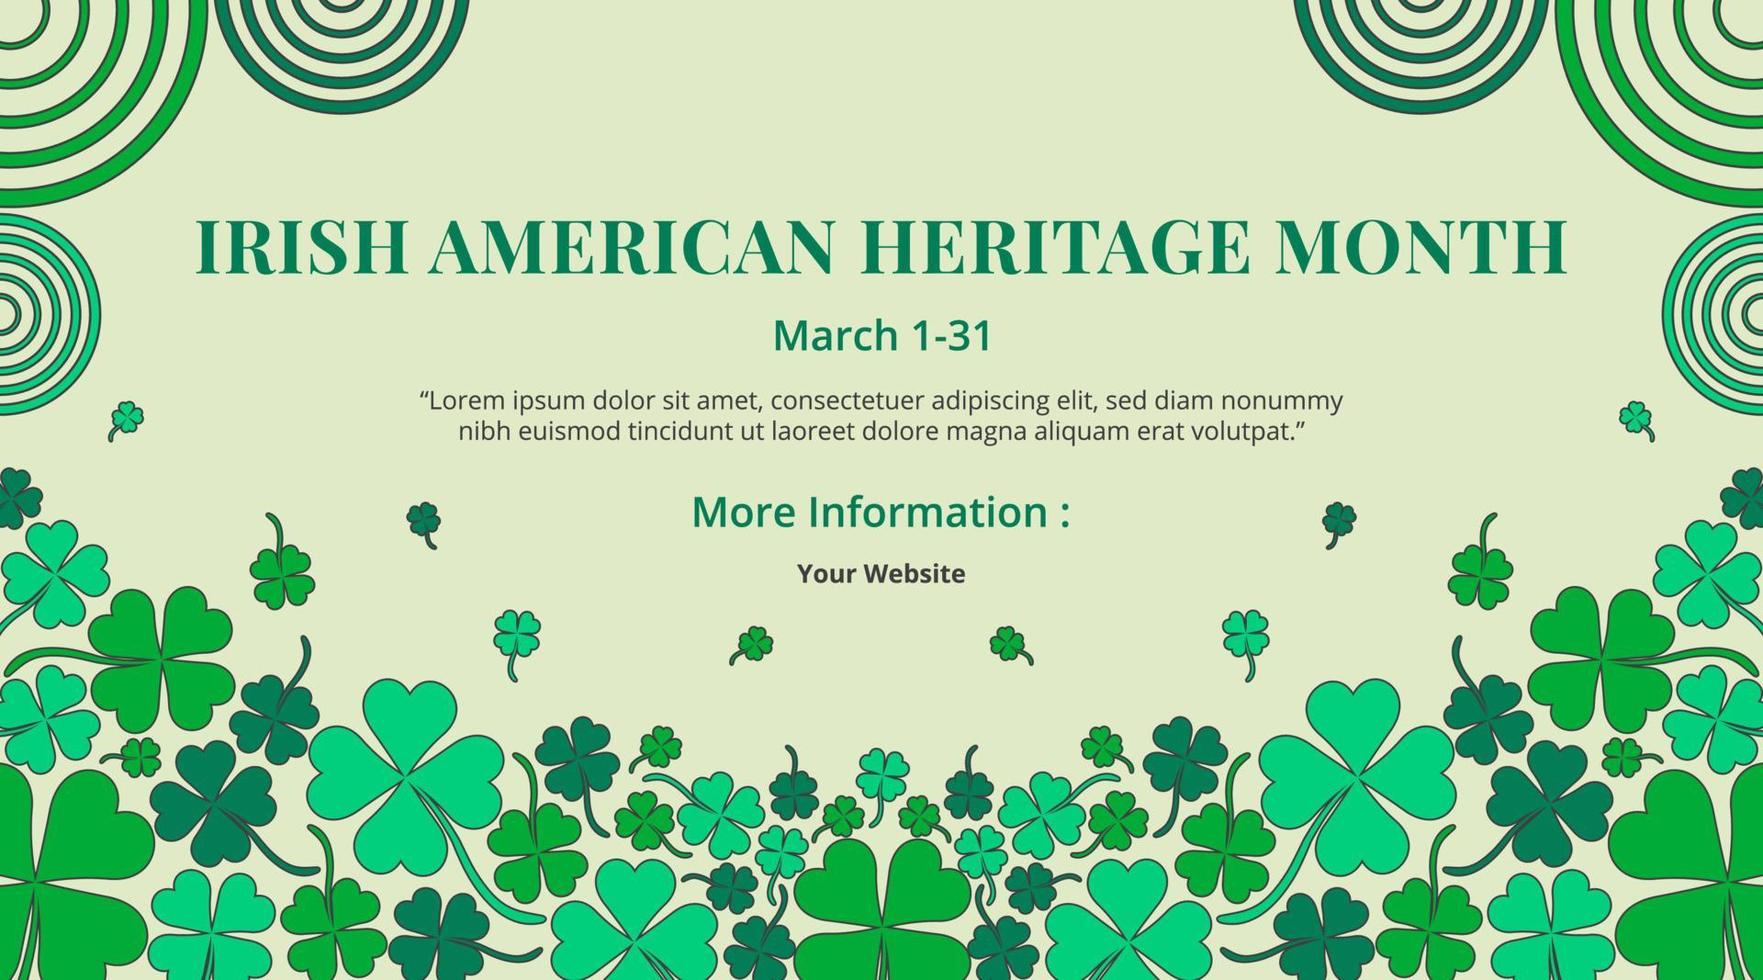 Irish American heritage month banner design with clover leaves vector